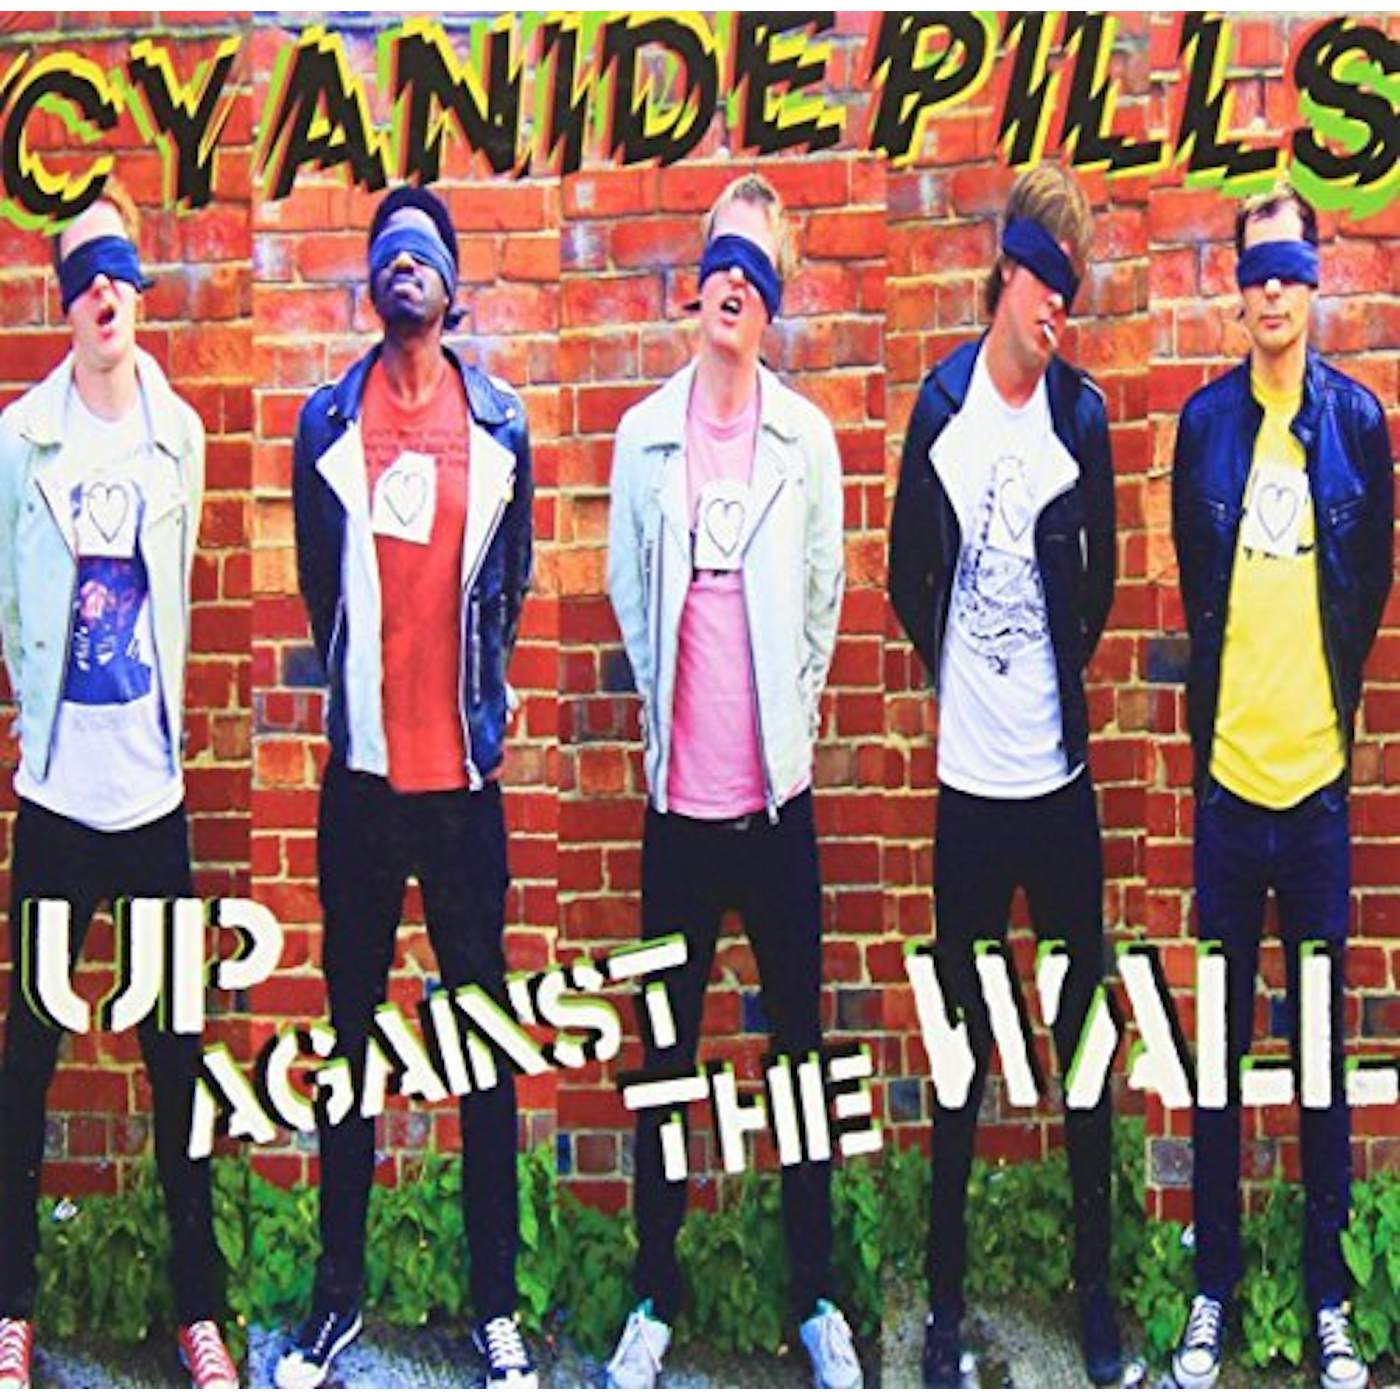 Cyanide Pills Up Against the Wall Vinyl Record